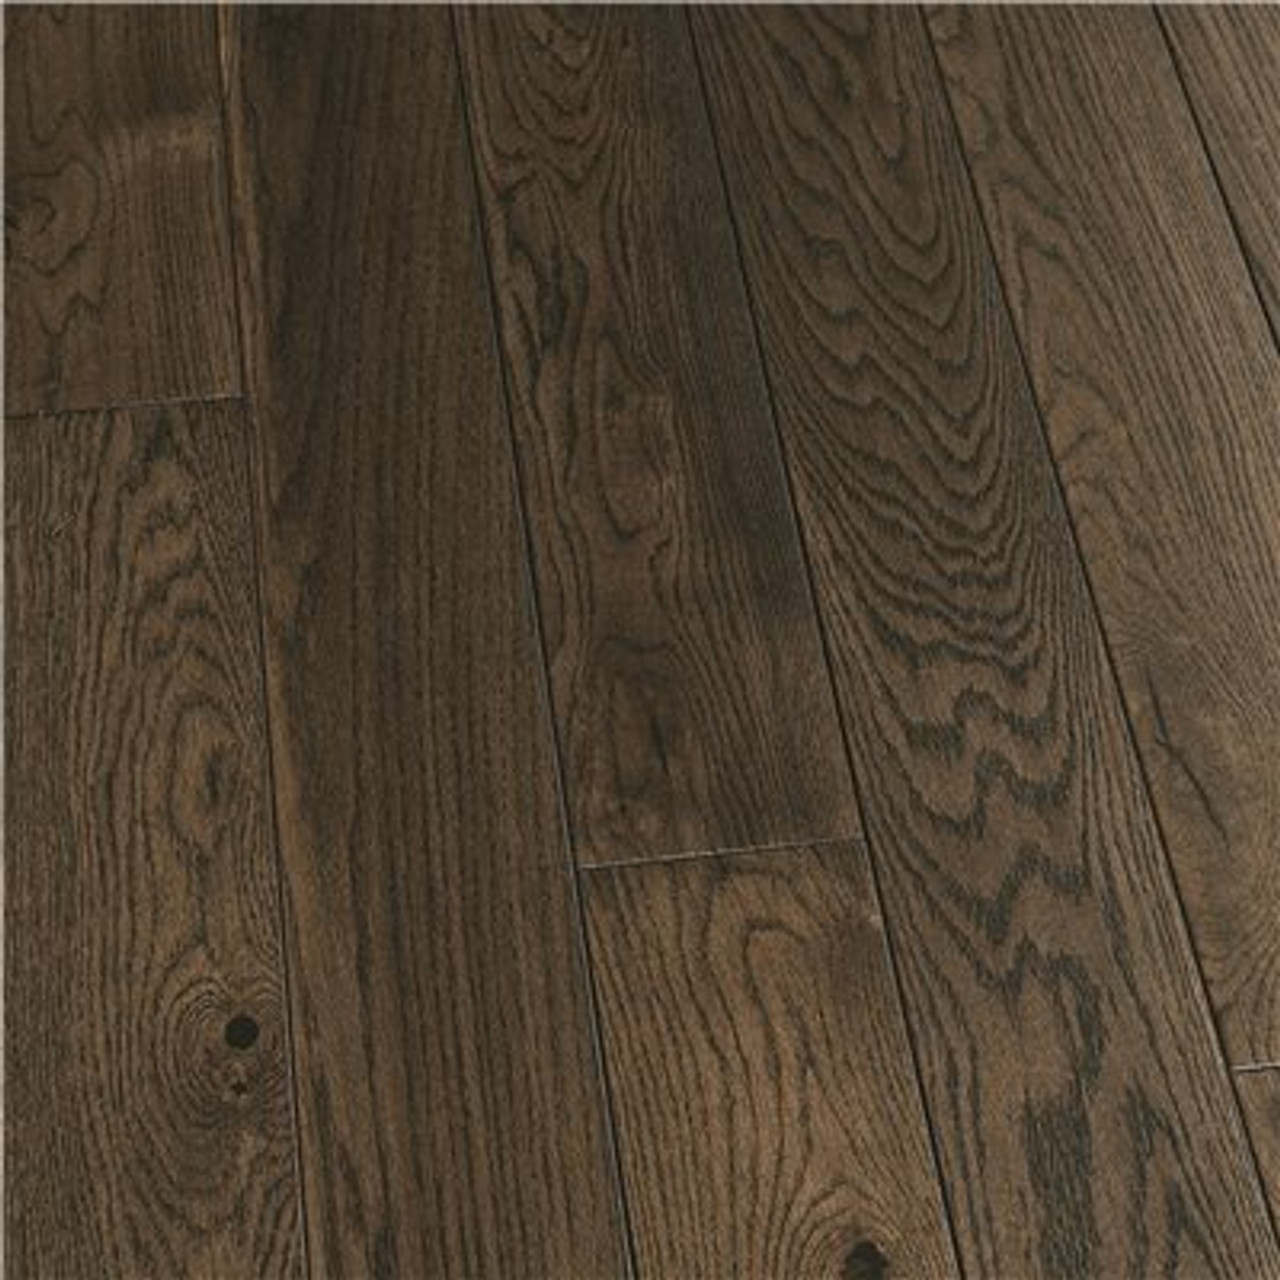 French Oak Boca Raton 3/4 In. Thick X 5 In. Wide X Varying Length Solid Hardwood Flooring (22.60 Sq. Ft./Case)